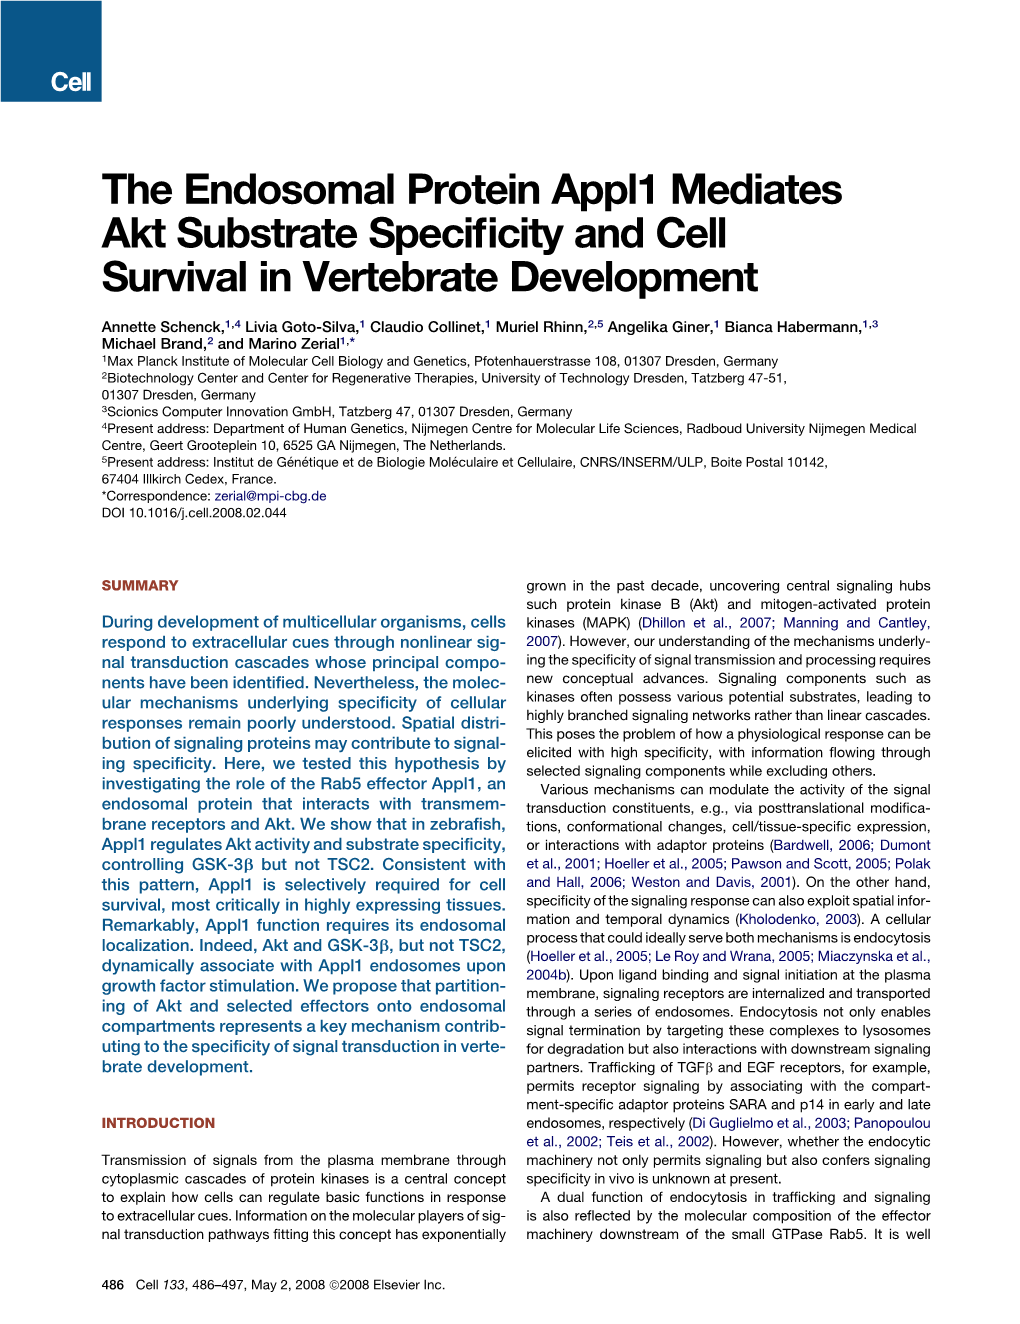 The Endosomal Protein Appl1 Mediates Akt Substrate Specificity and Cell Survival in Vertebrate Development